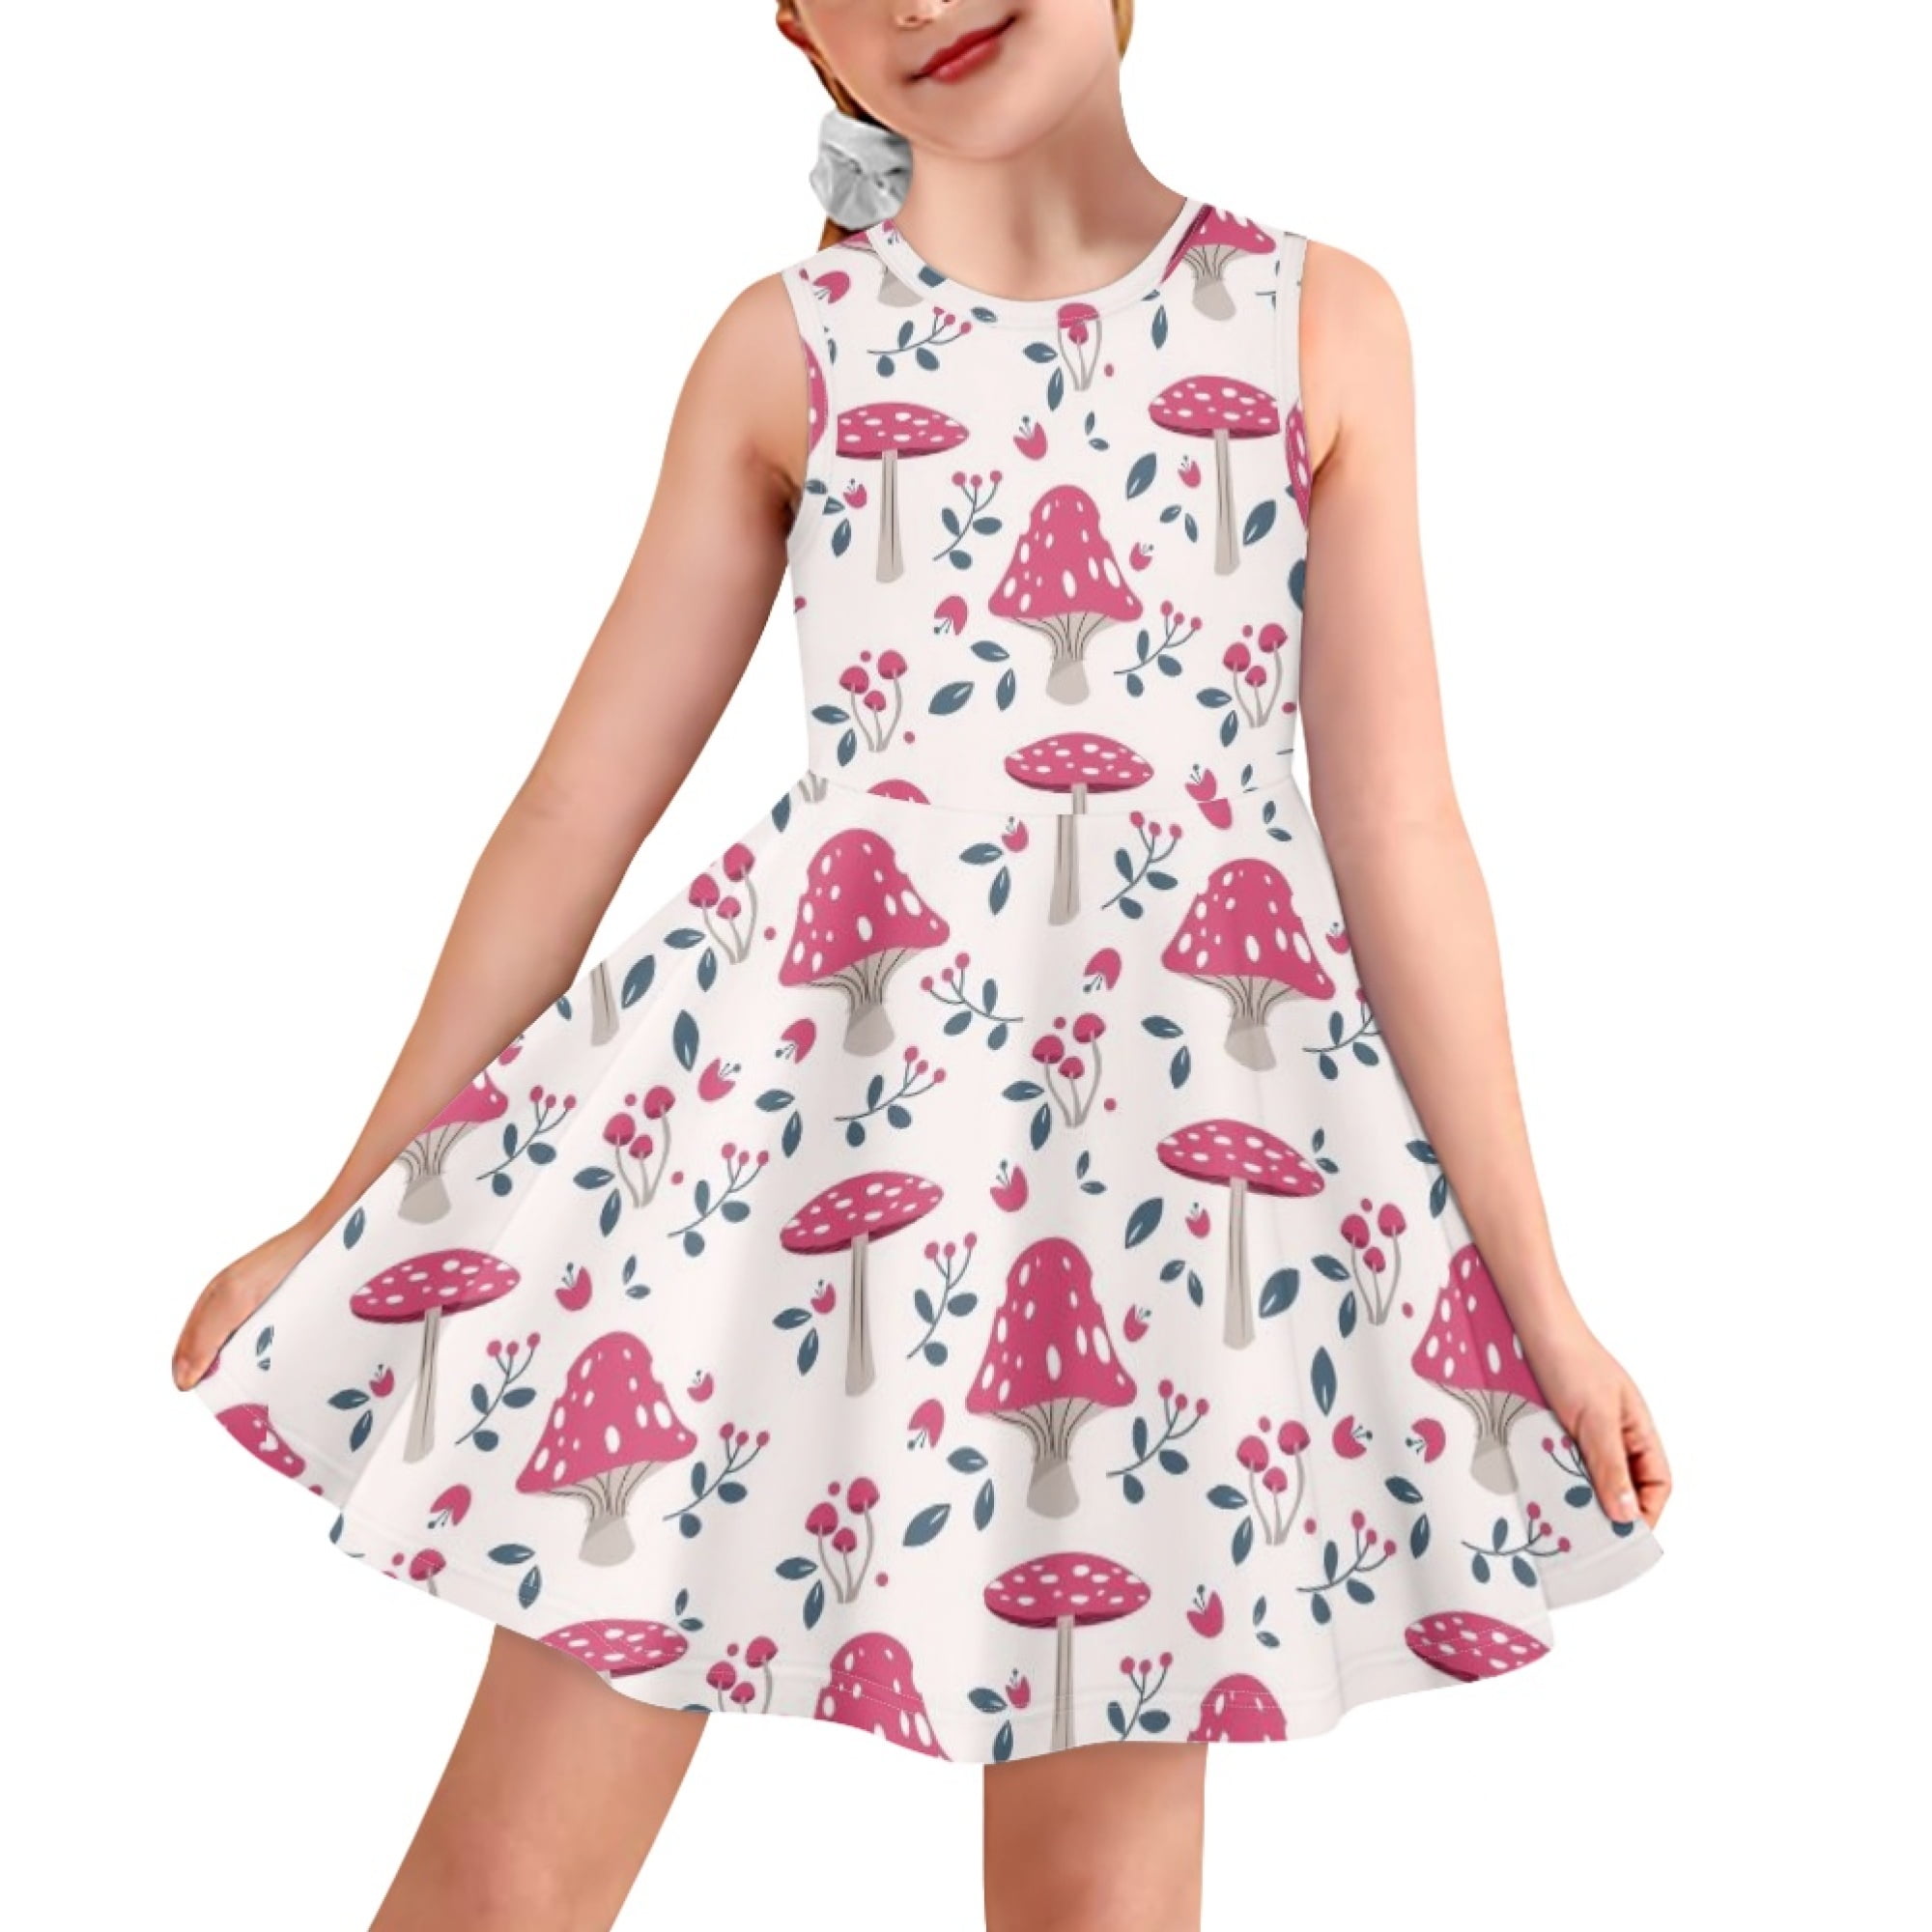 2023 Summer Princess Sundress For Girls Casual Mini Dress For Teens,  Parties, And Social Occasions Available In Sizes 12 15 Years From  Xiezhualan, $14.85 | DHgate.Com